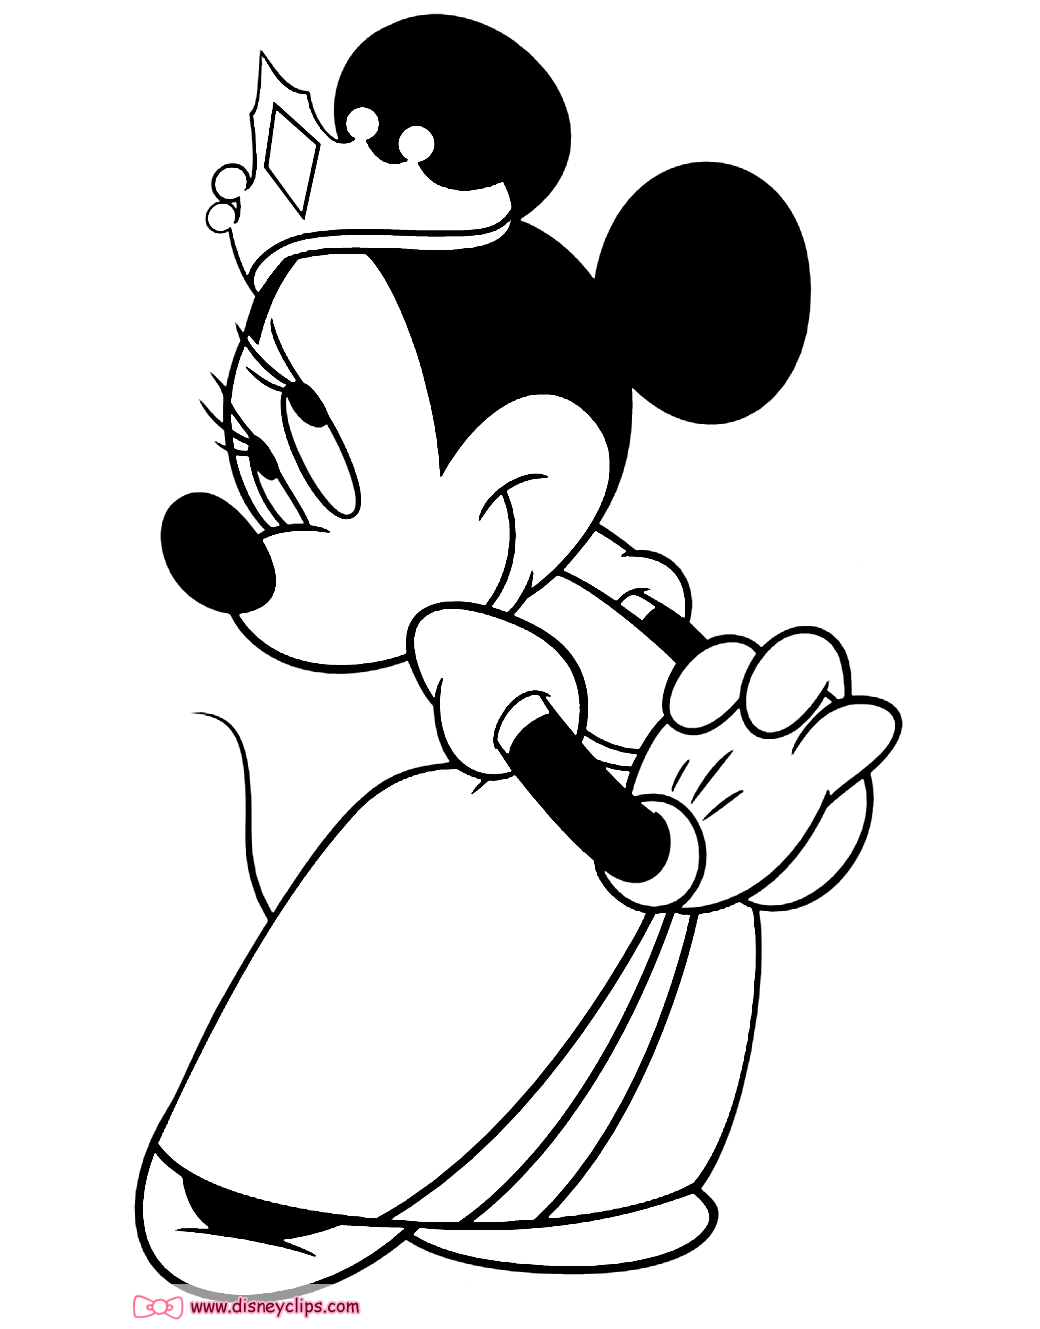 minnie mouse color page minnie mouse printable coloring pages 3 disney coloring book page mouse color minnie 